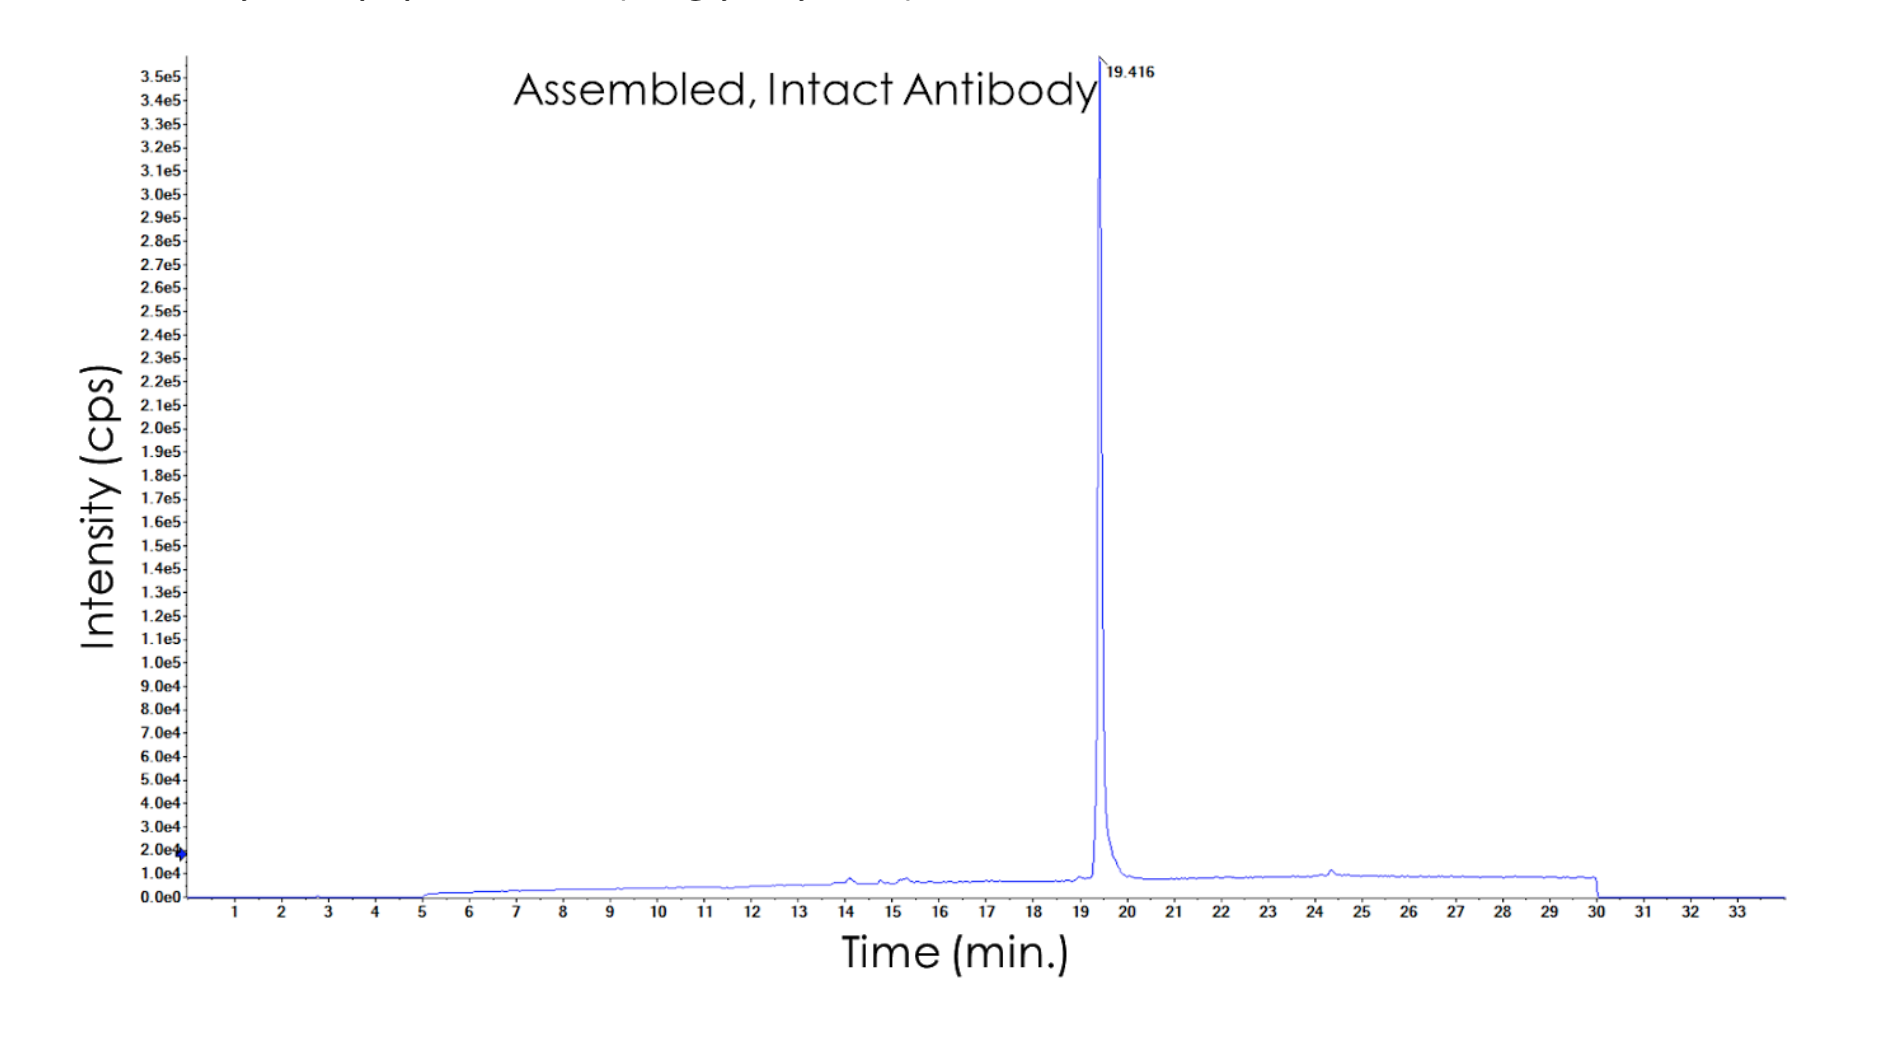 Line graph with Intensity (cps) on y-axis from 0.0e0-3.5e5 in increments of 1.0e4 cps and Time (min) on the x-axis from 0-33 in increments of 1 min. The sample is deglycosylated, so the high intensity peak indicates the protein homogeneity without glycoforms attached.